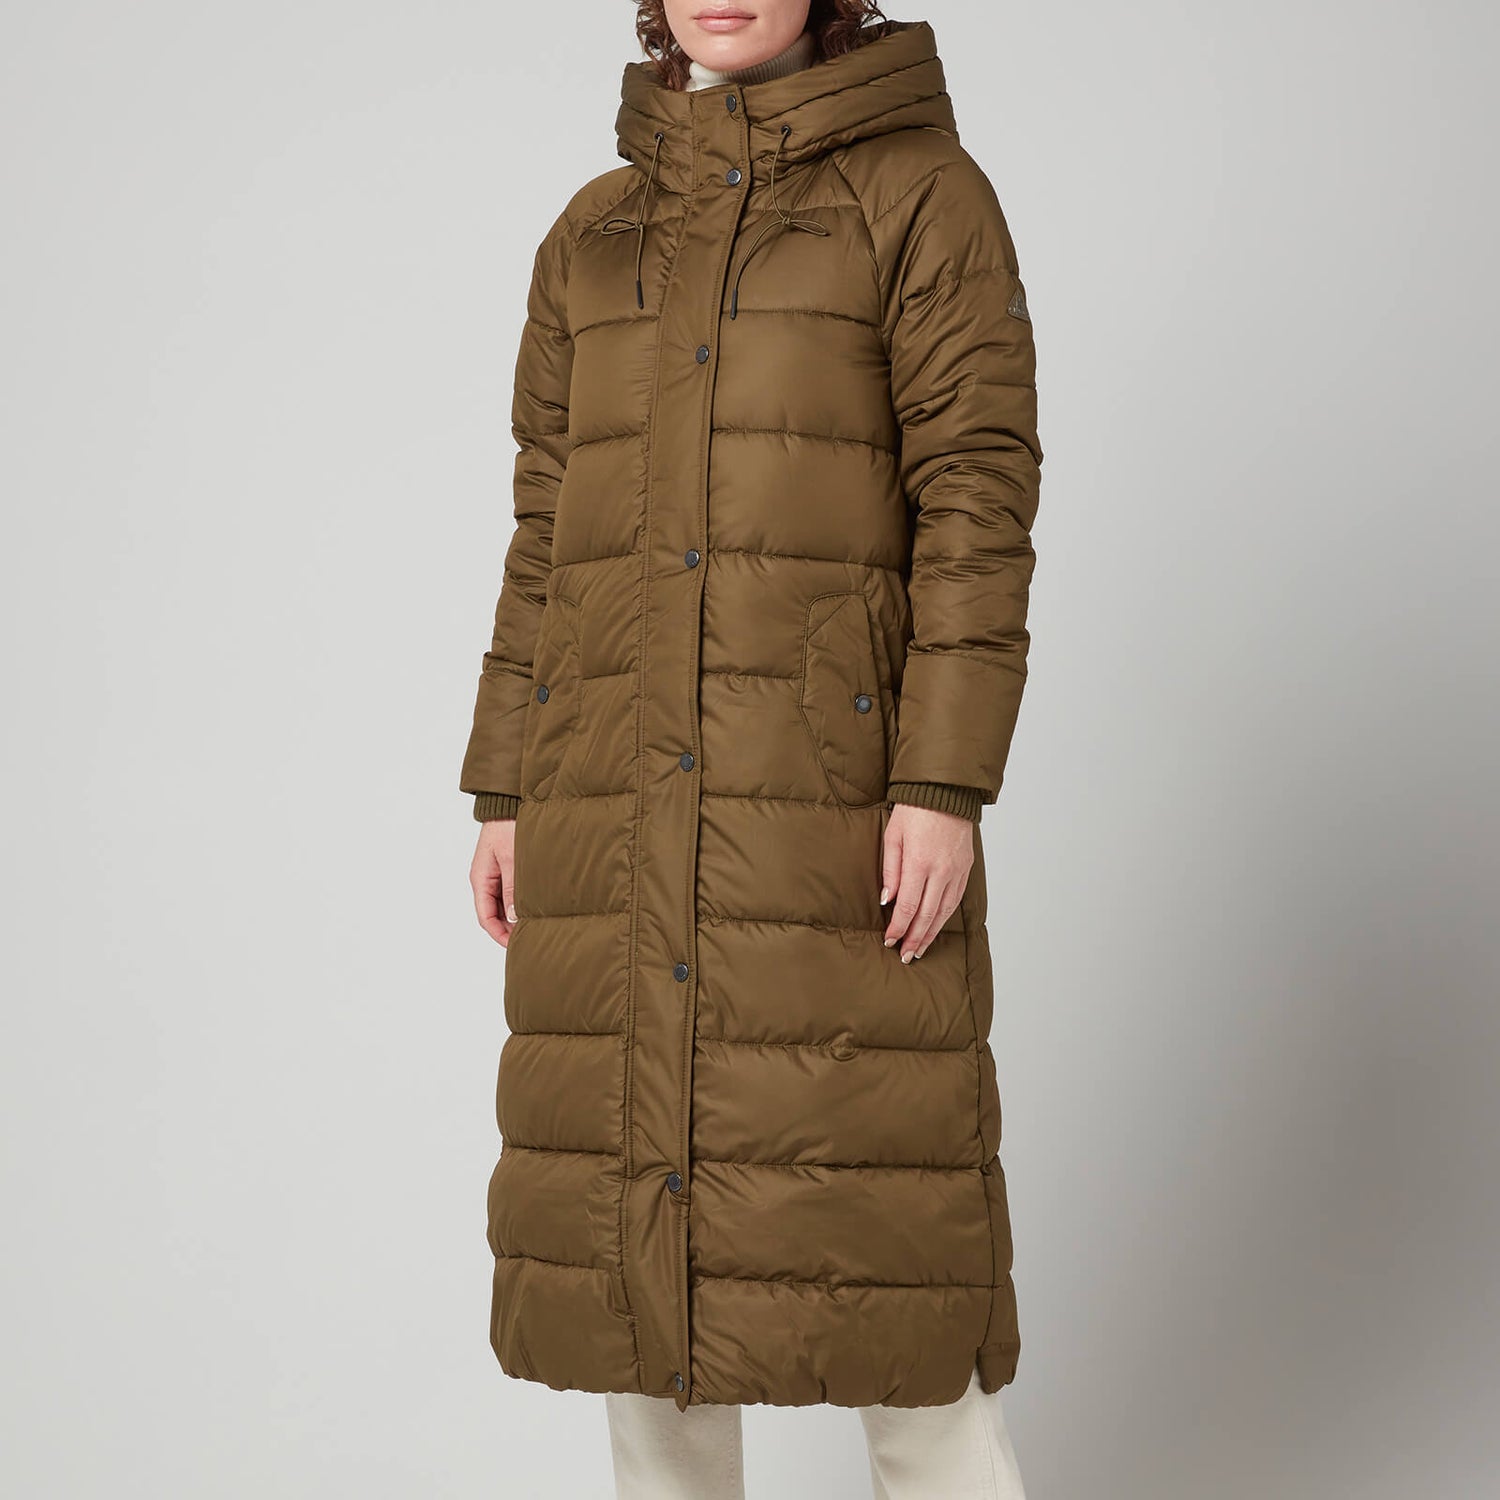 Barbour Women's Crimdon Quilted Jacket - Nori Green